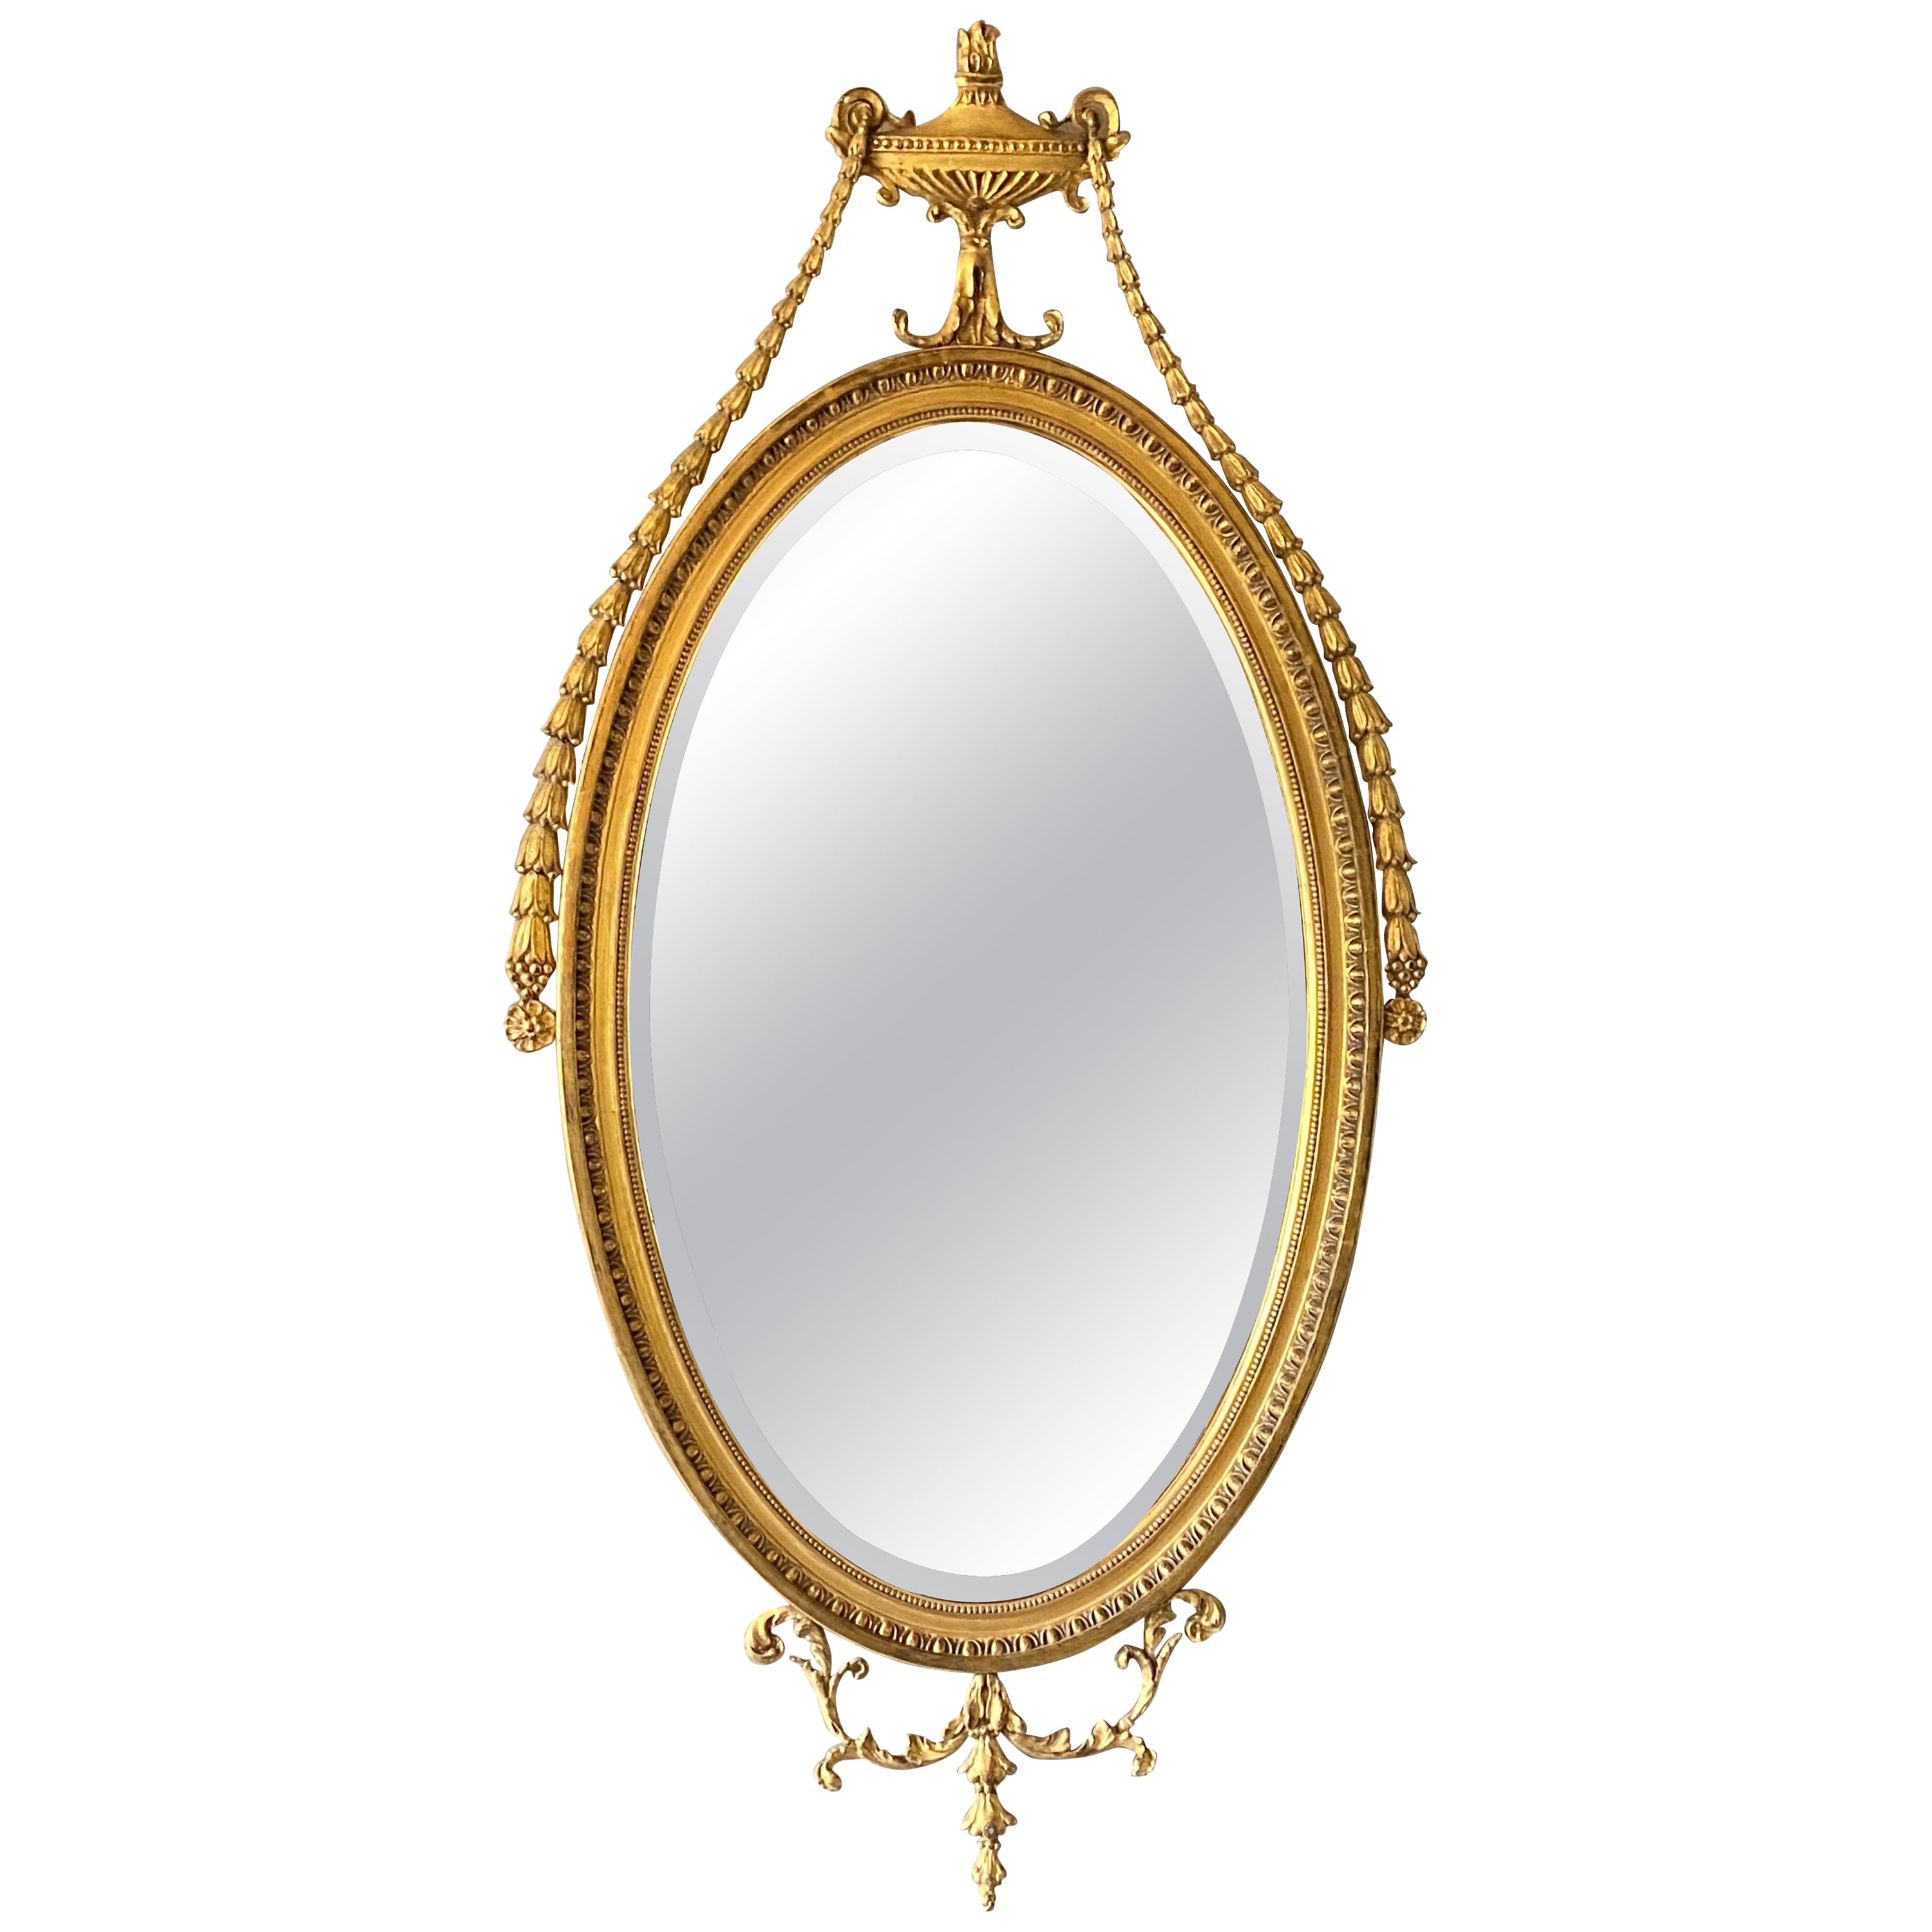 English Adam Style Oval Gilt Mirror, Early 20th Century For Sale